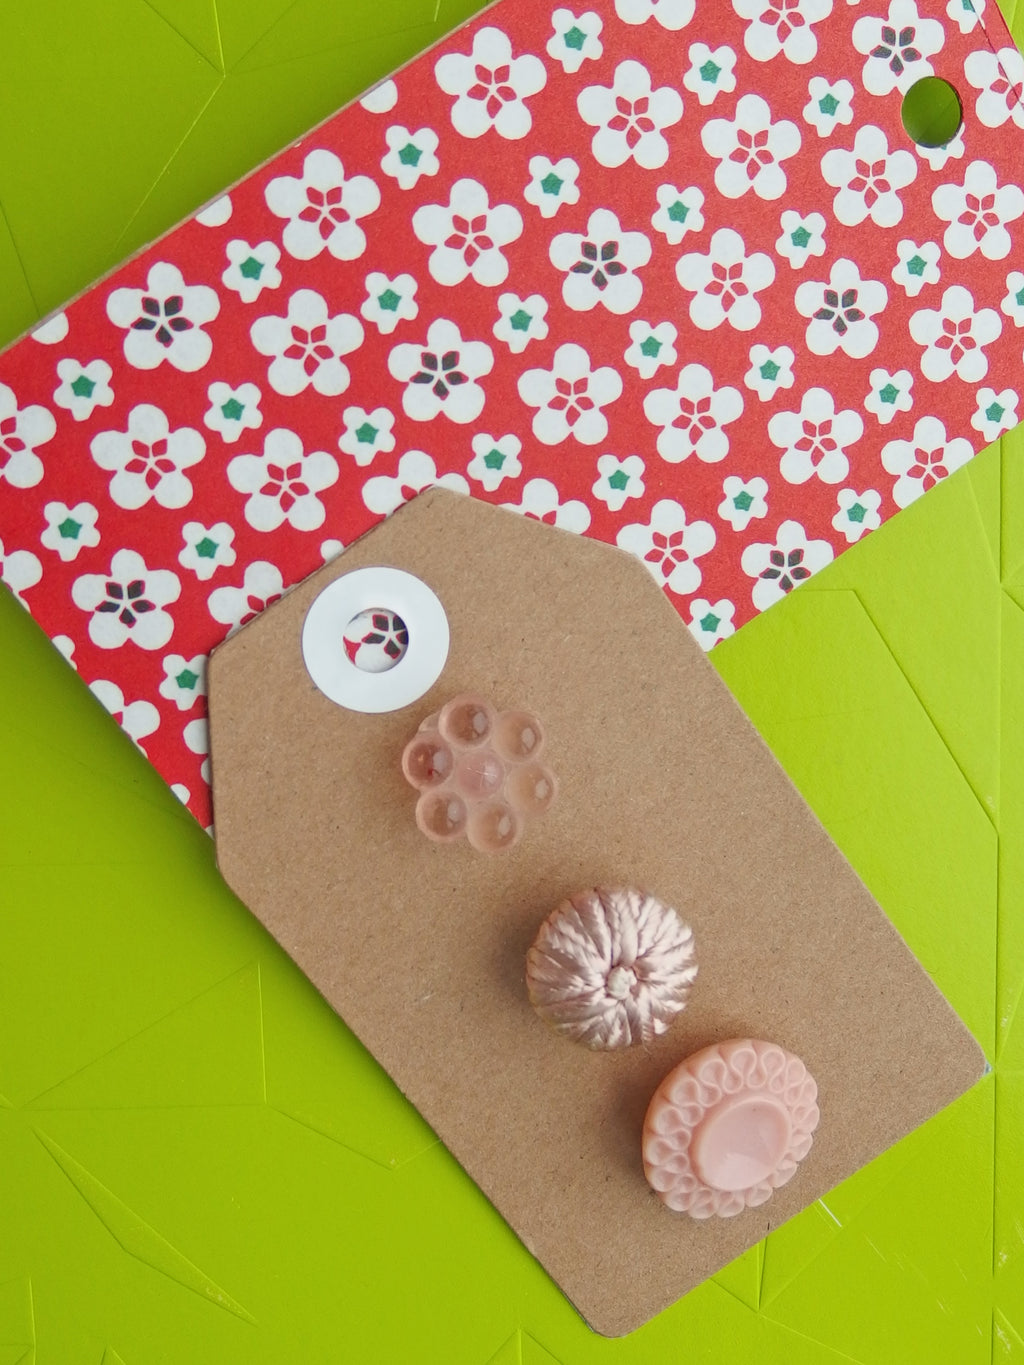 Vintage Buttons: Soft pinks